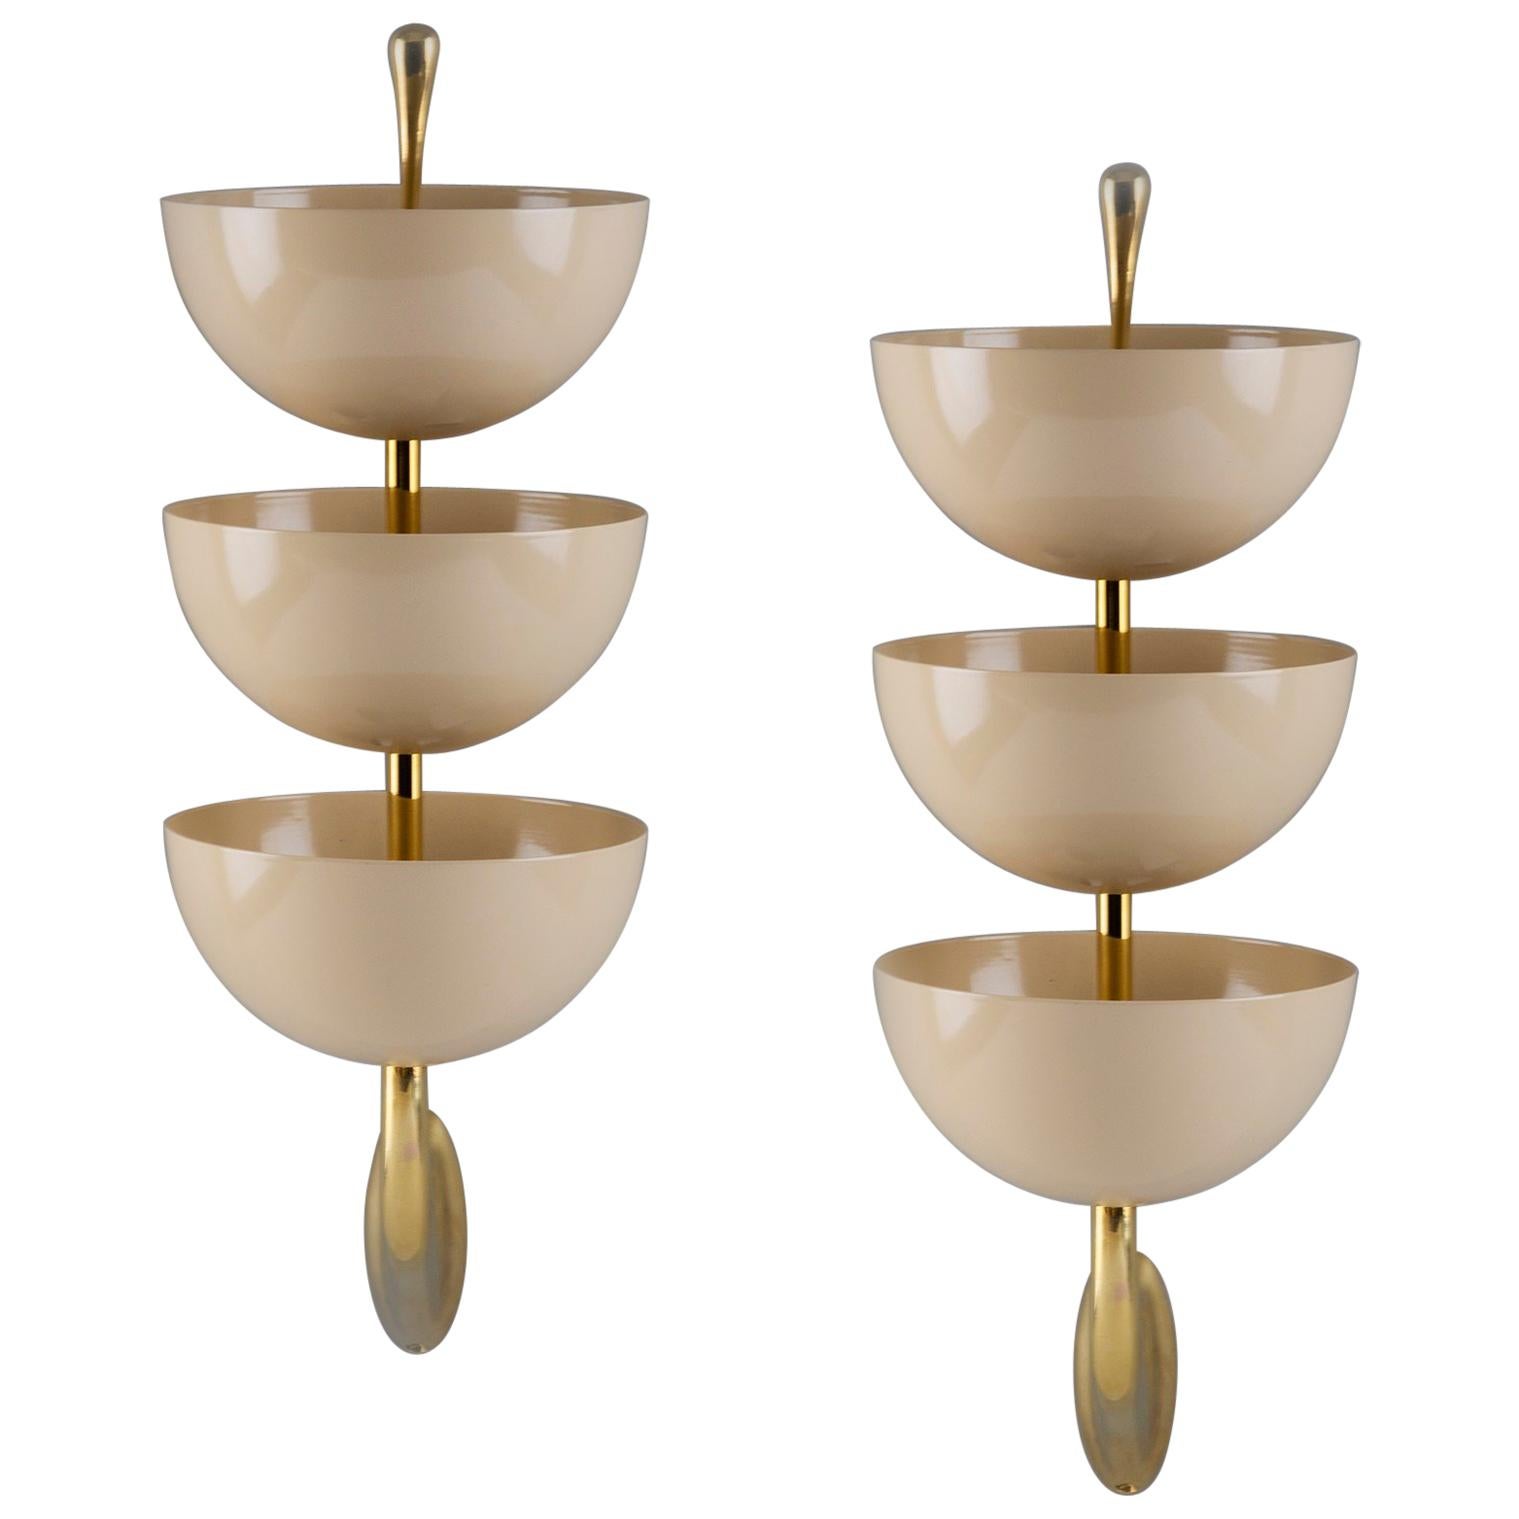 Exquisite Pair of Tiered White Enamel and Brass Sconces by Stilnovo, Italy 1950s 2